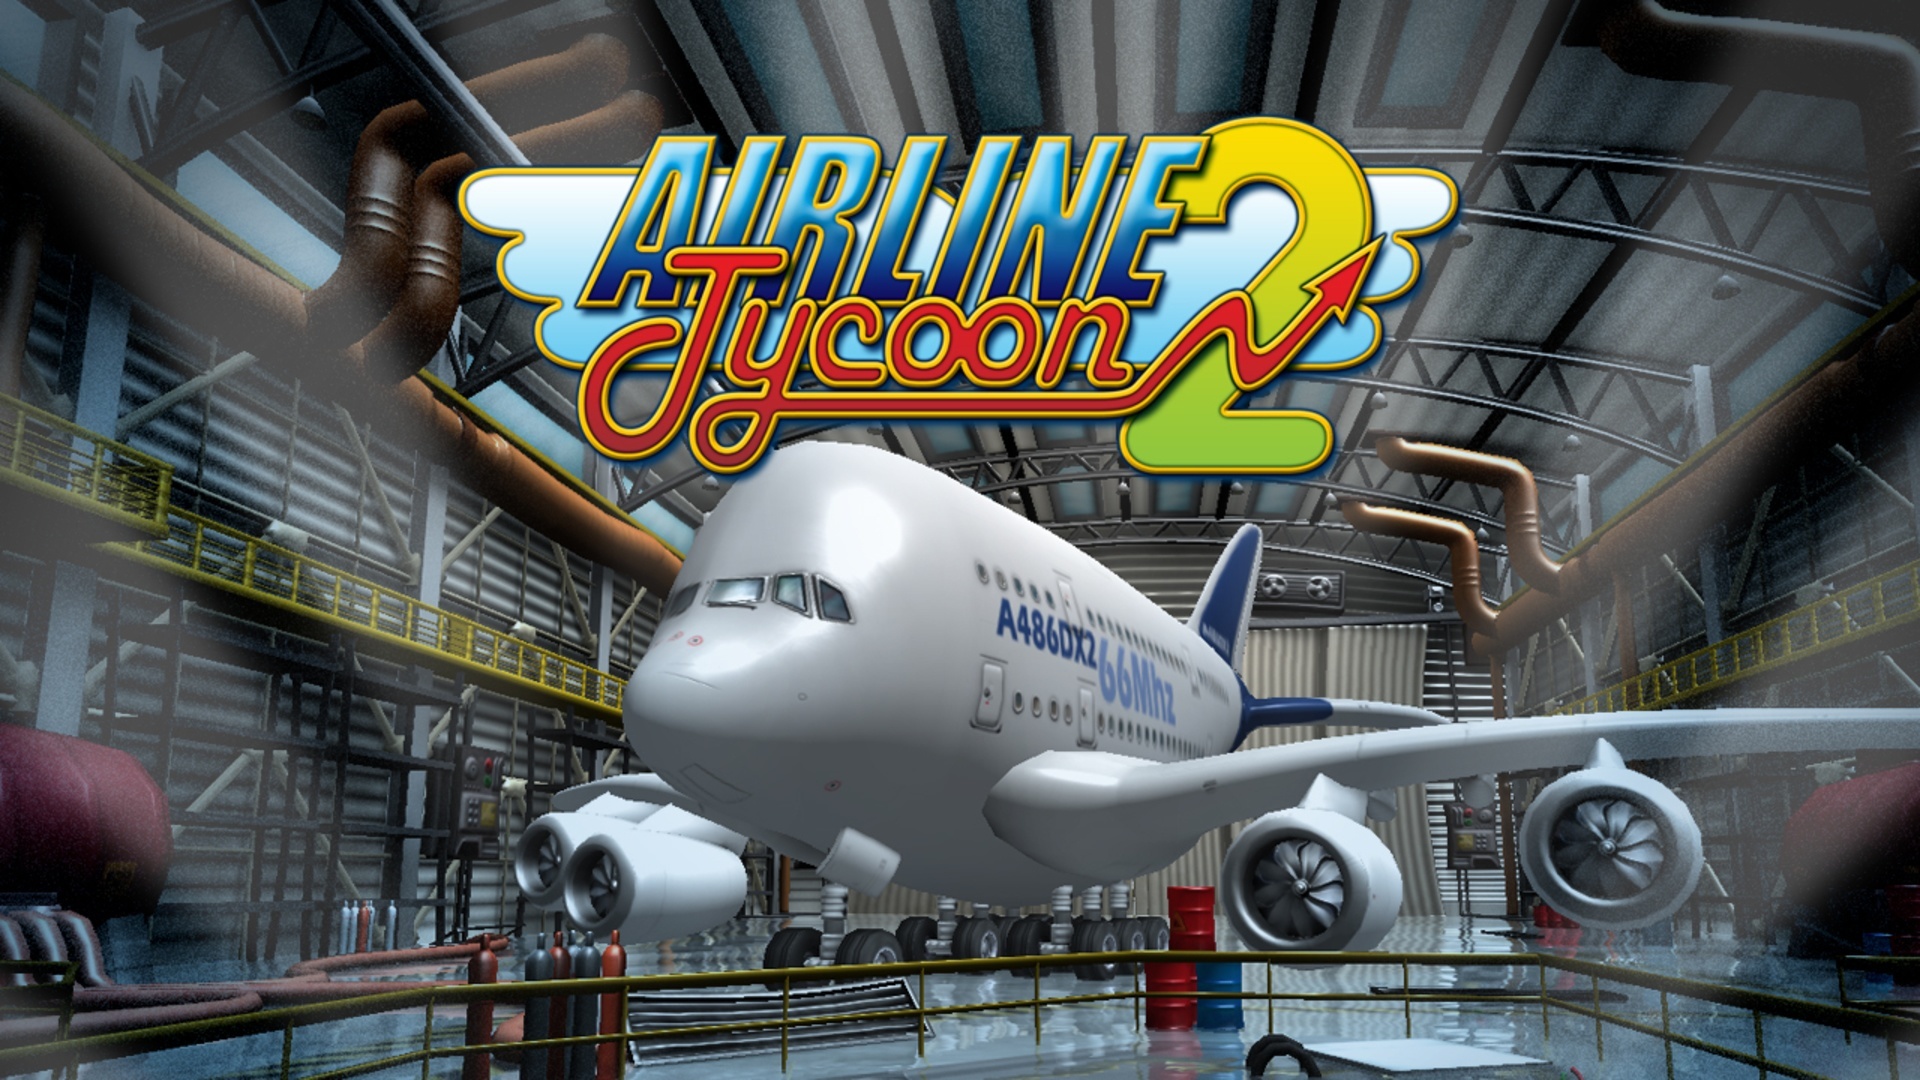 airline tycoon deluxe hints